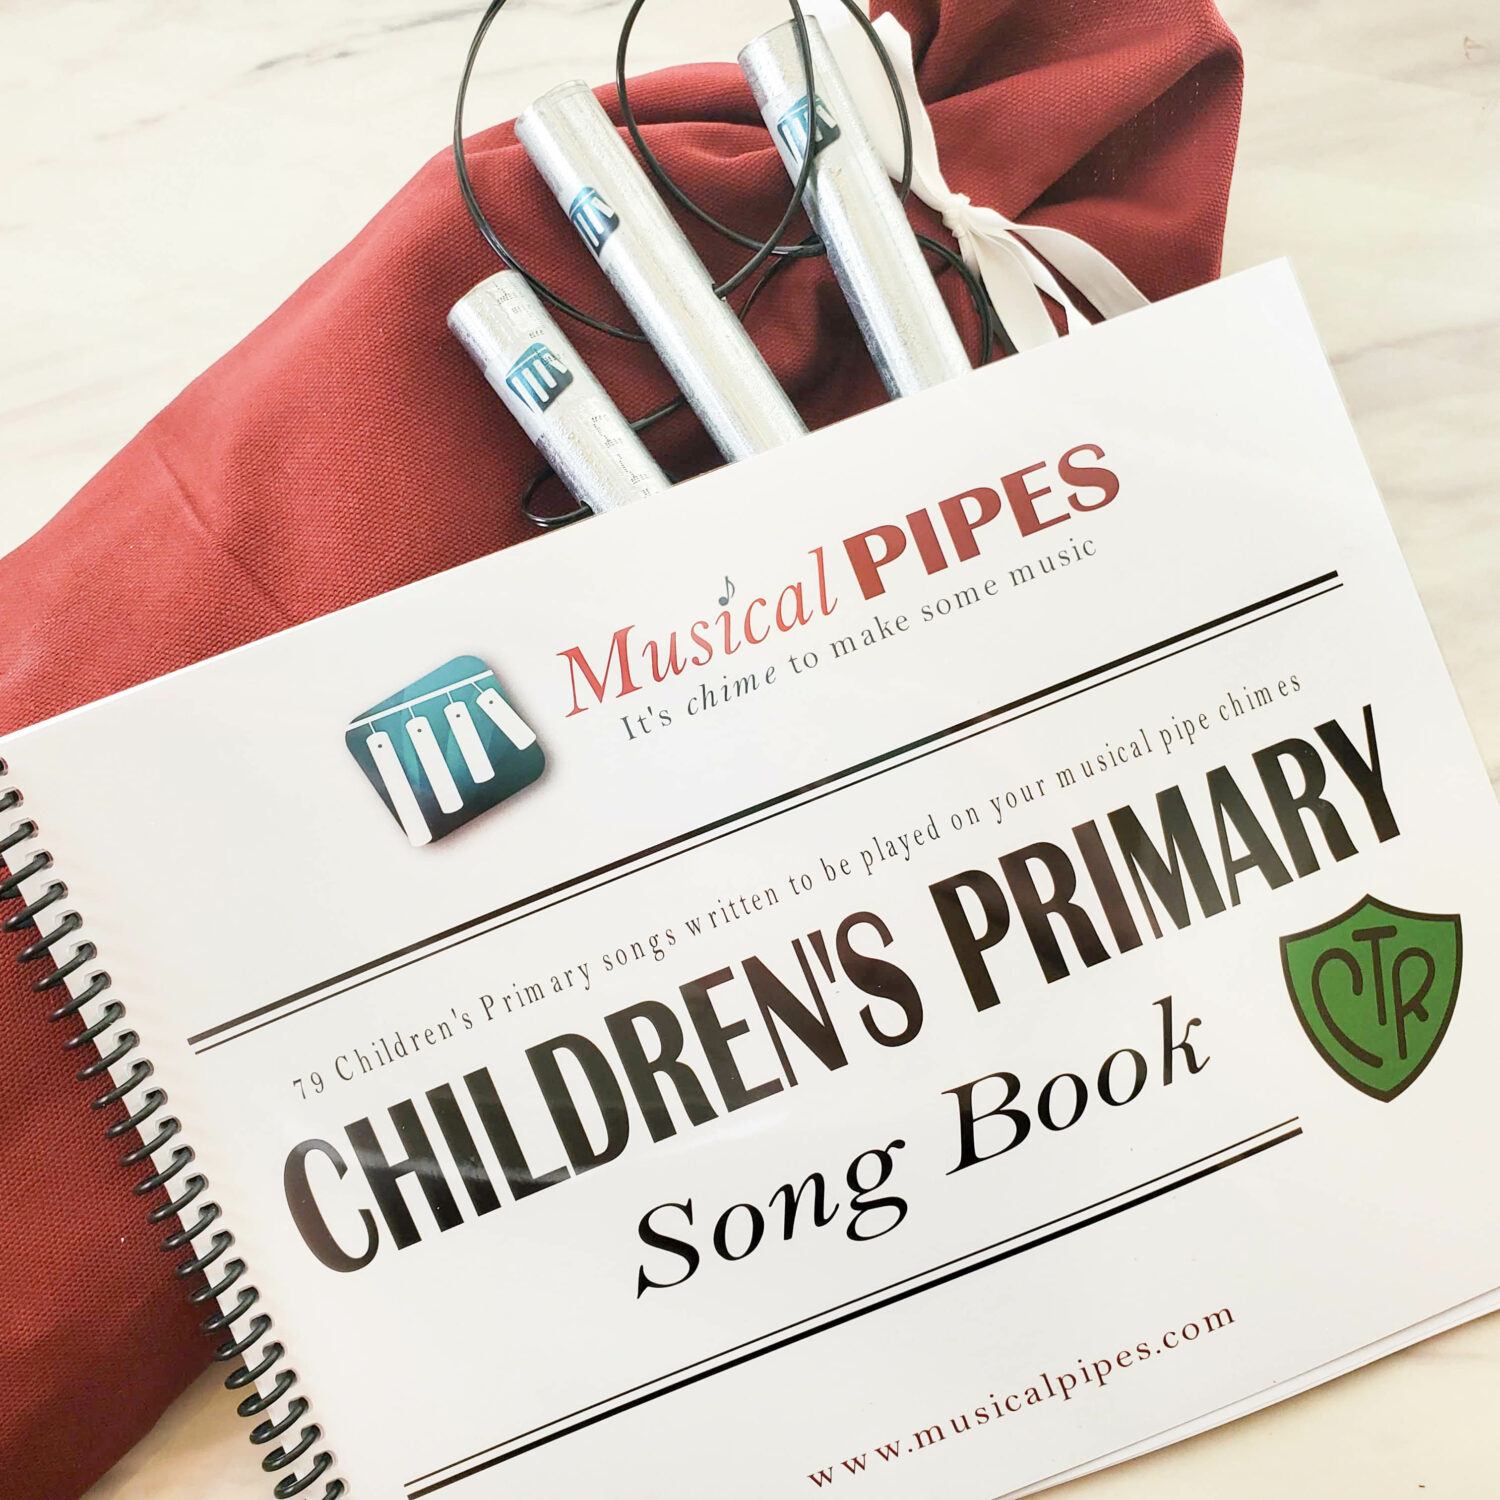 Musical Pipes Chimes for Primary fun singing time manipulative for LDS Primary Music Leaders - a great instrument kids love to use!